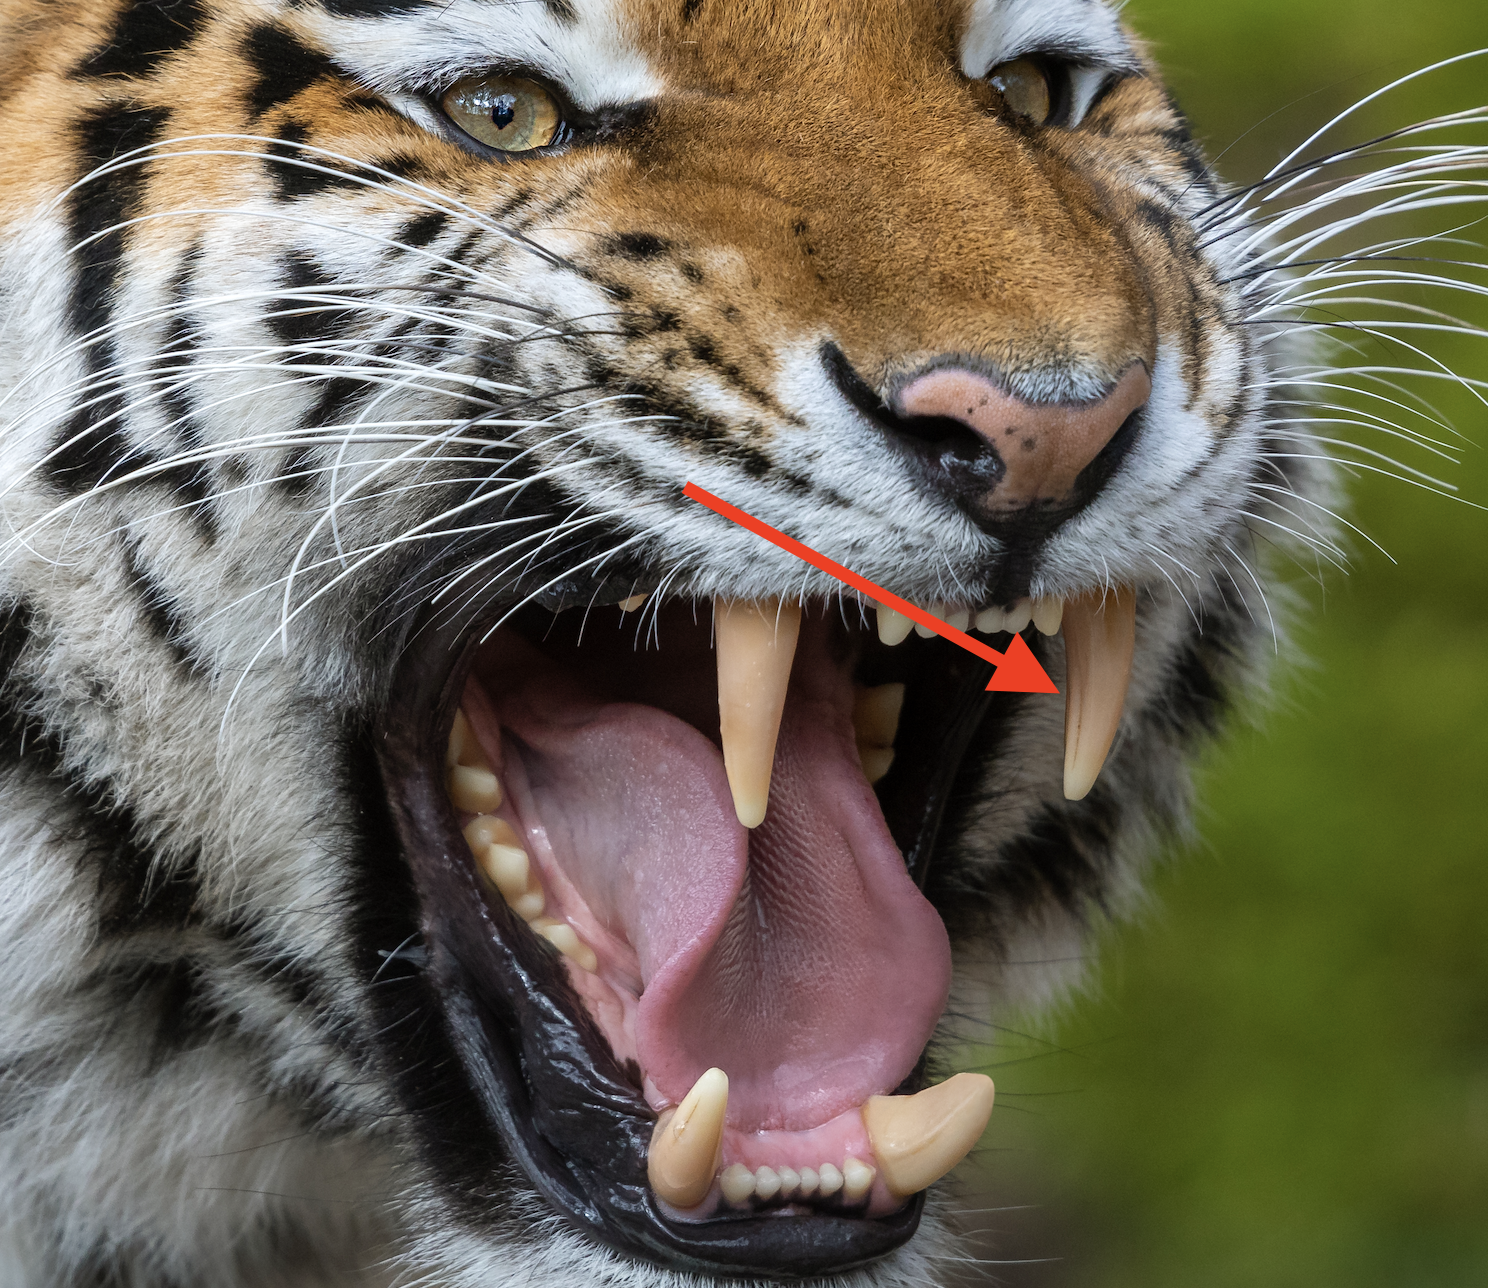 A tiger showing its teeth